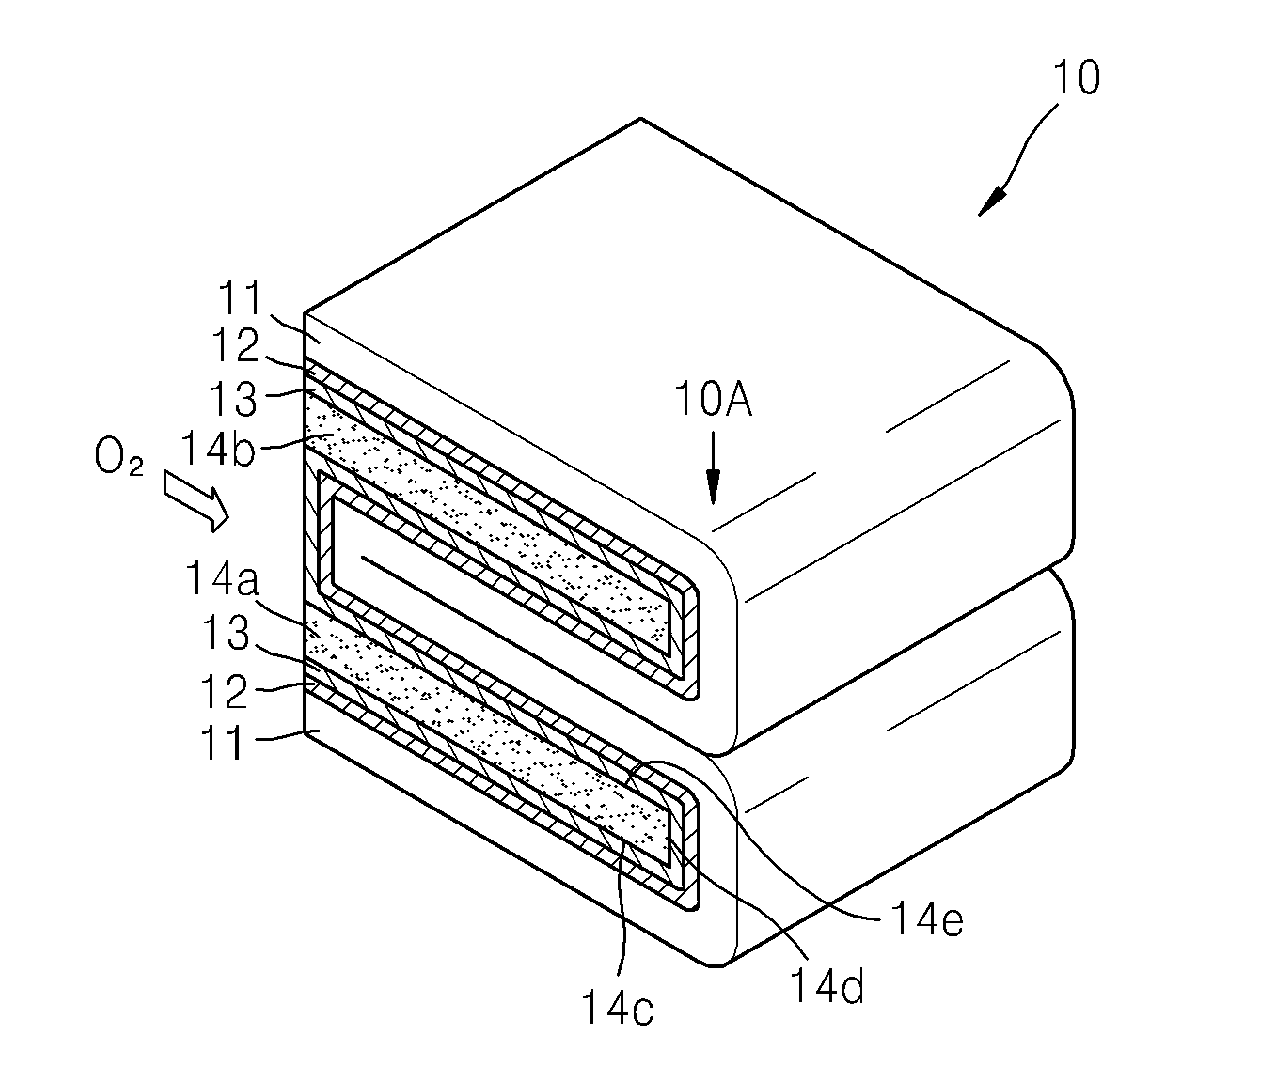 Metal-air battery having folded structure and method of manufacturing the same